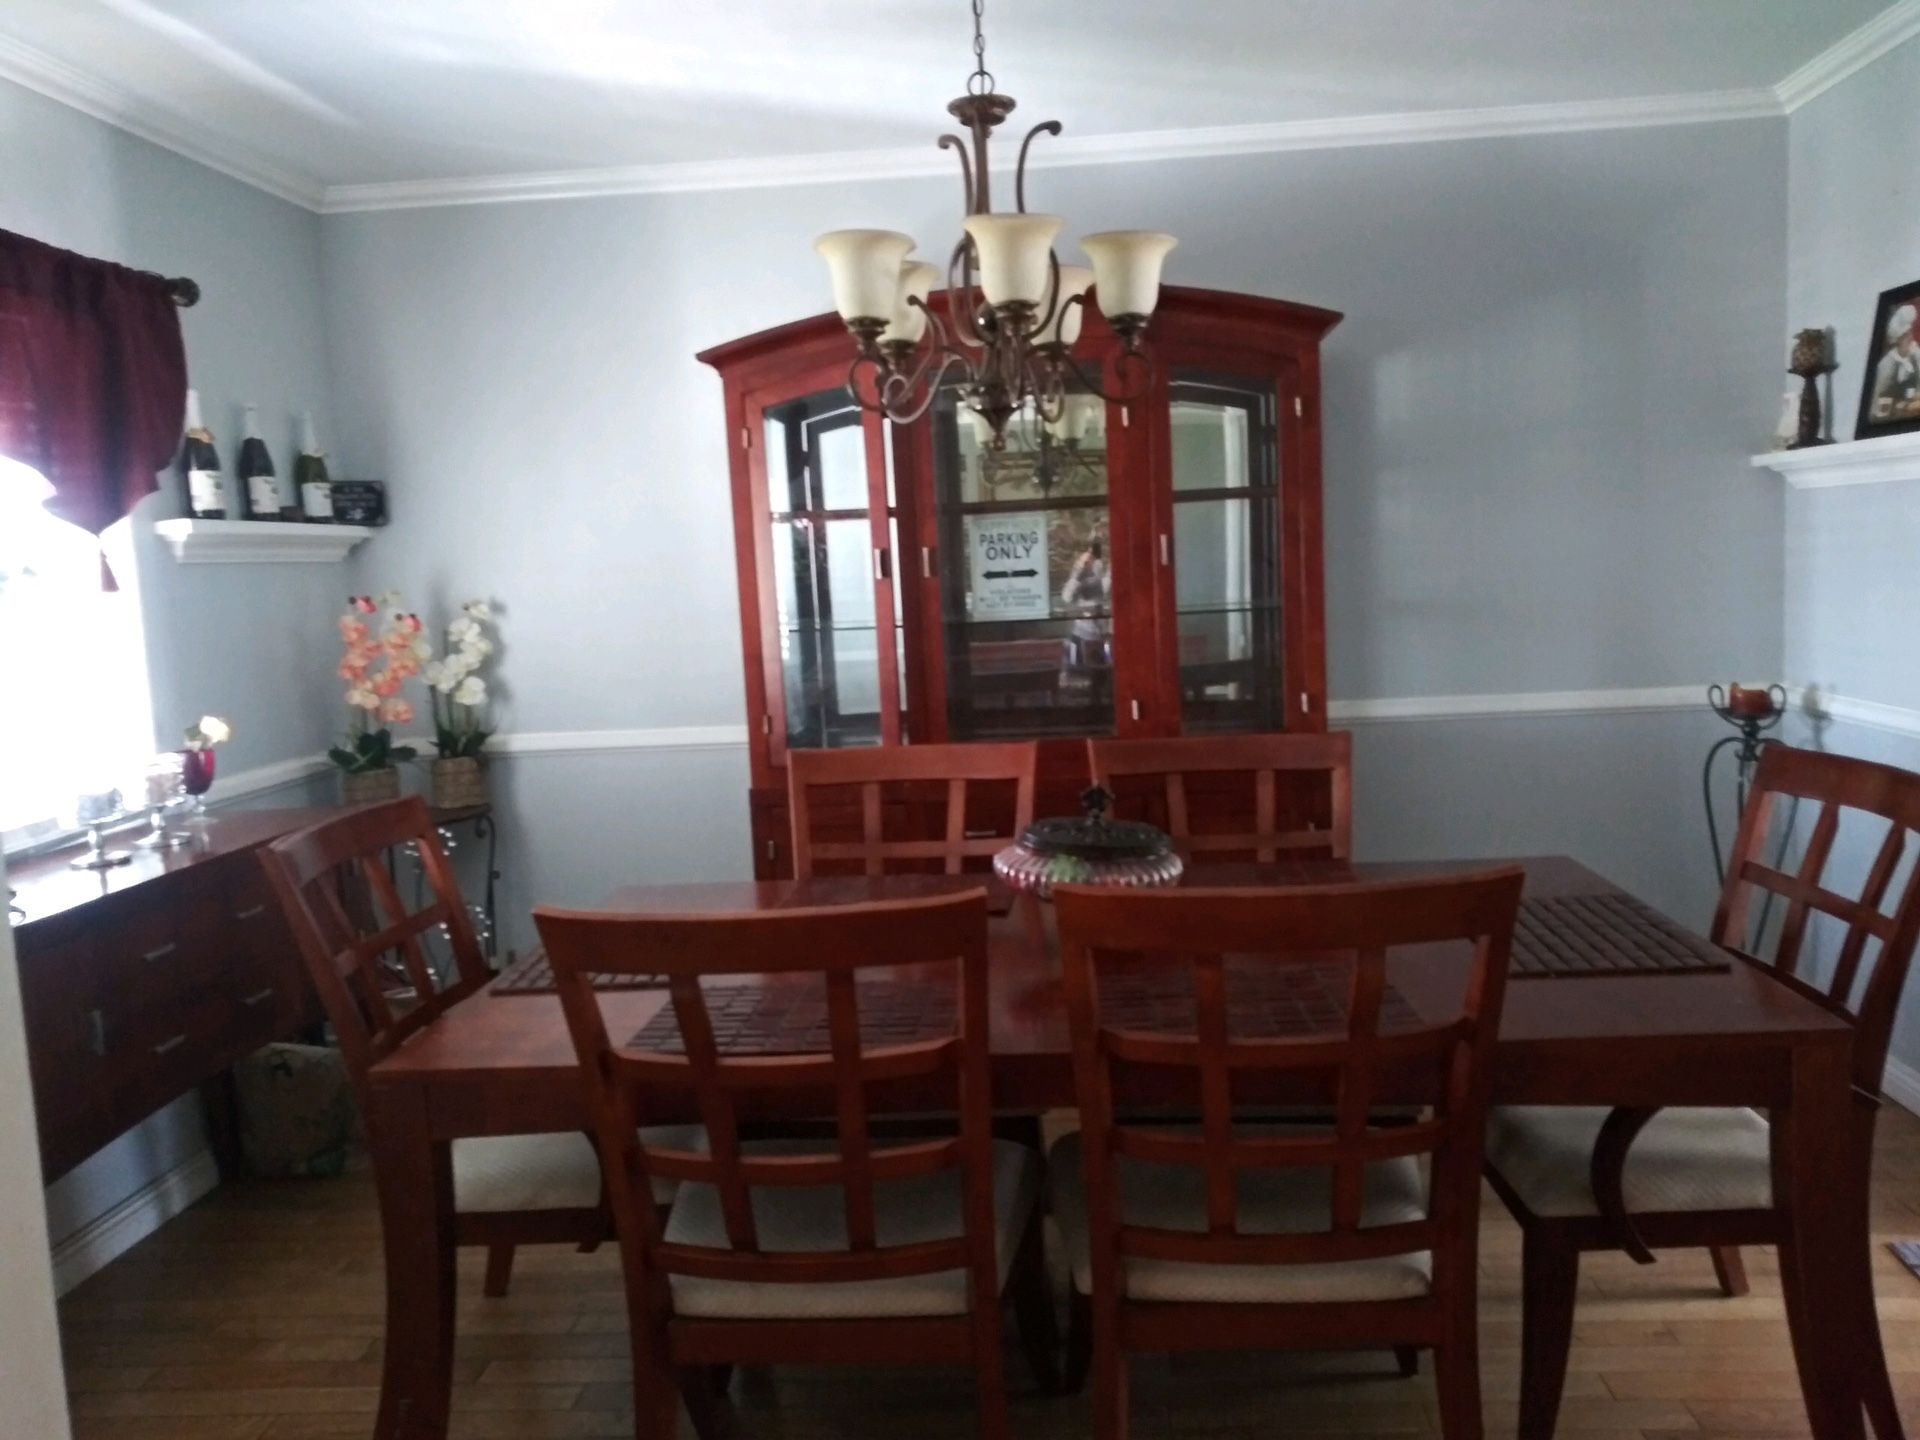 Entire Dining set (China, buffet, dinning table, & 6 chairs)